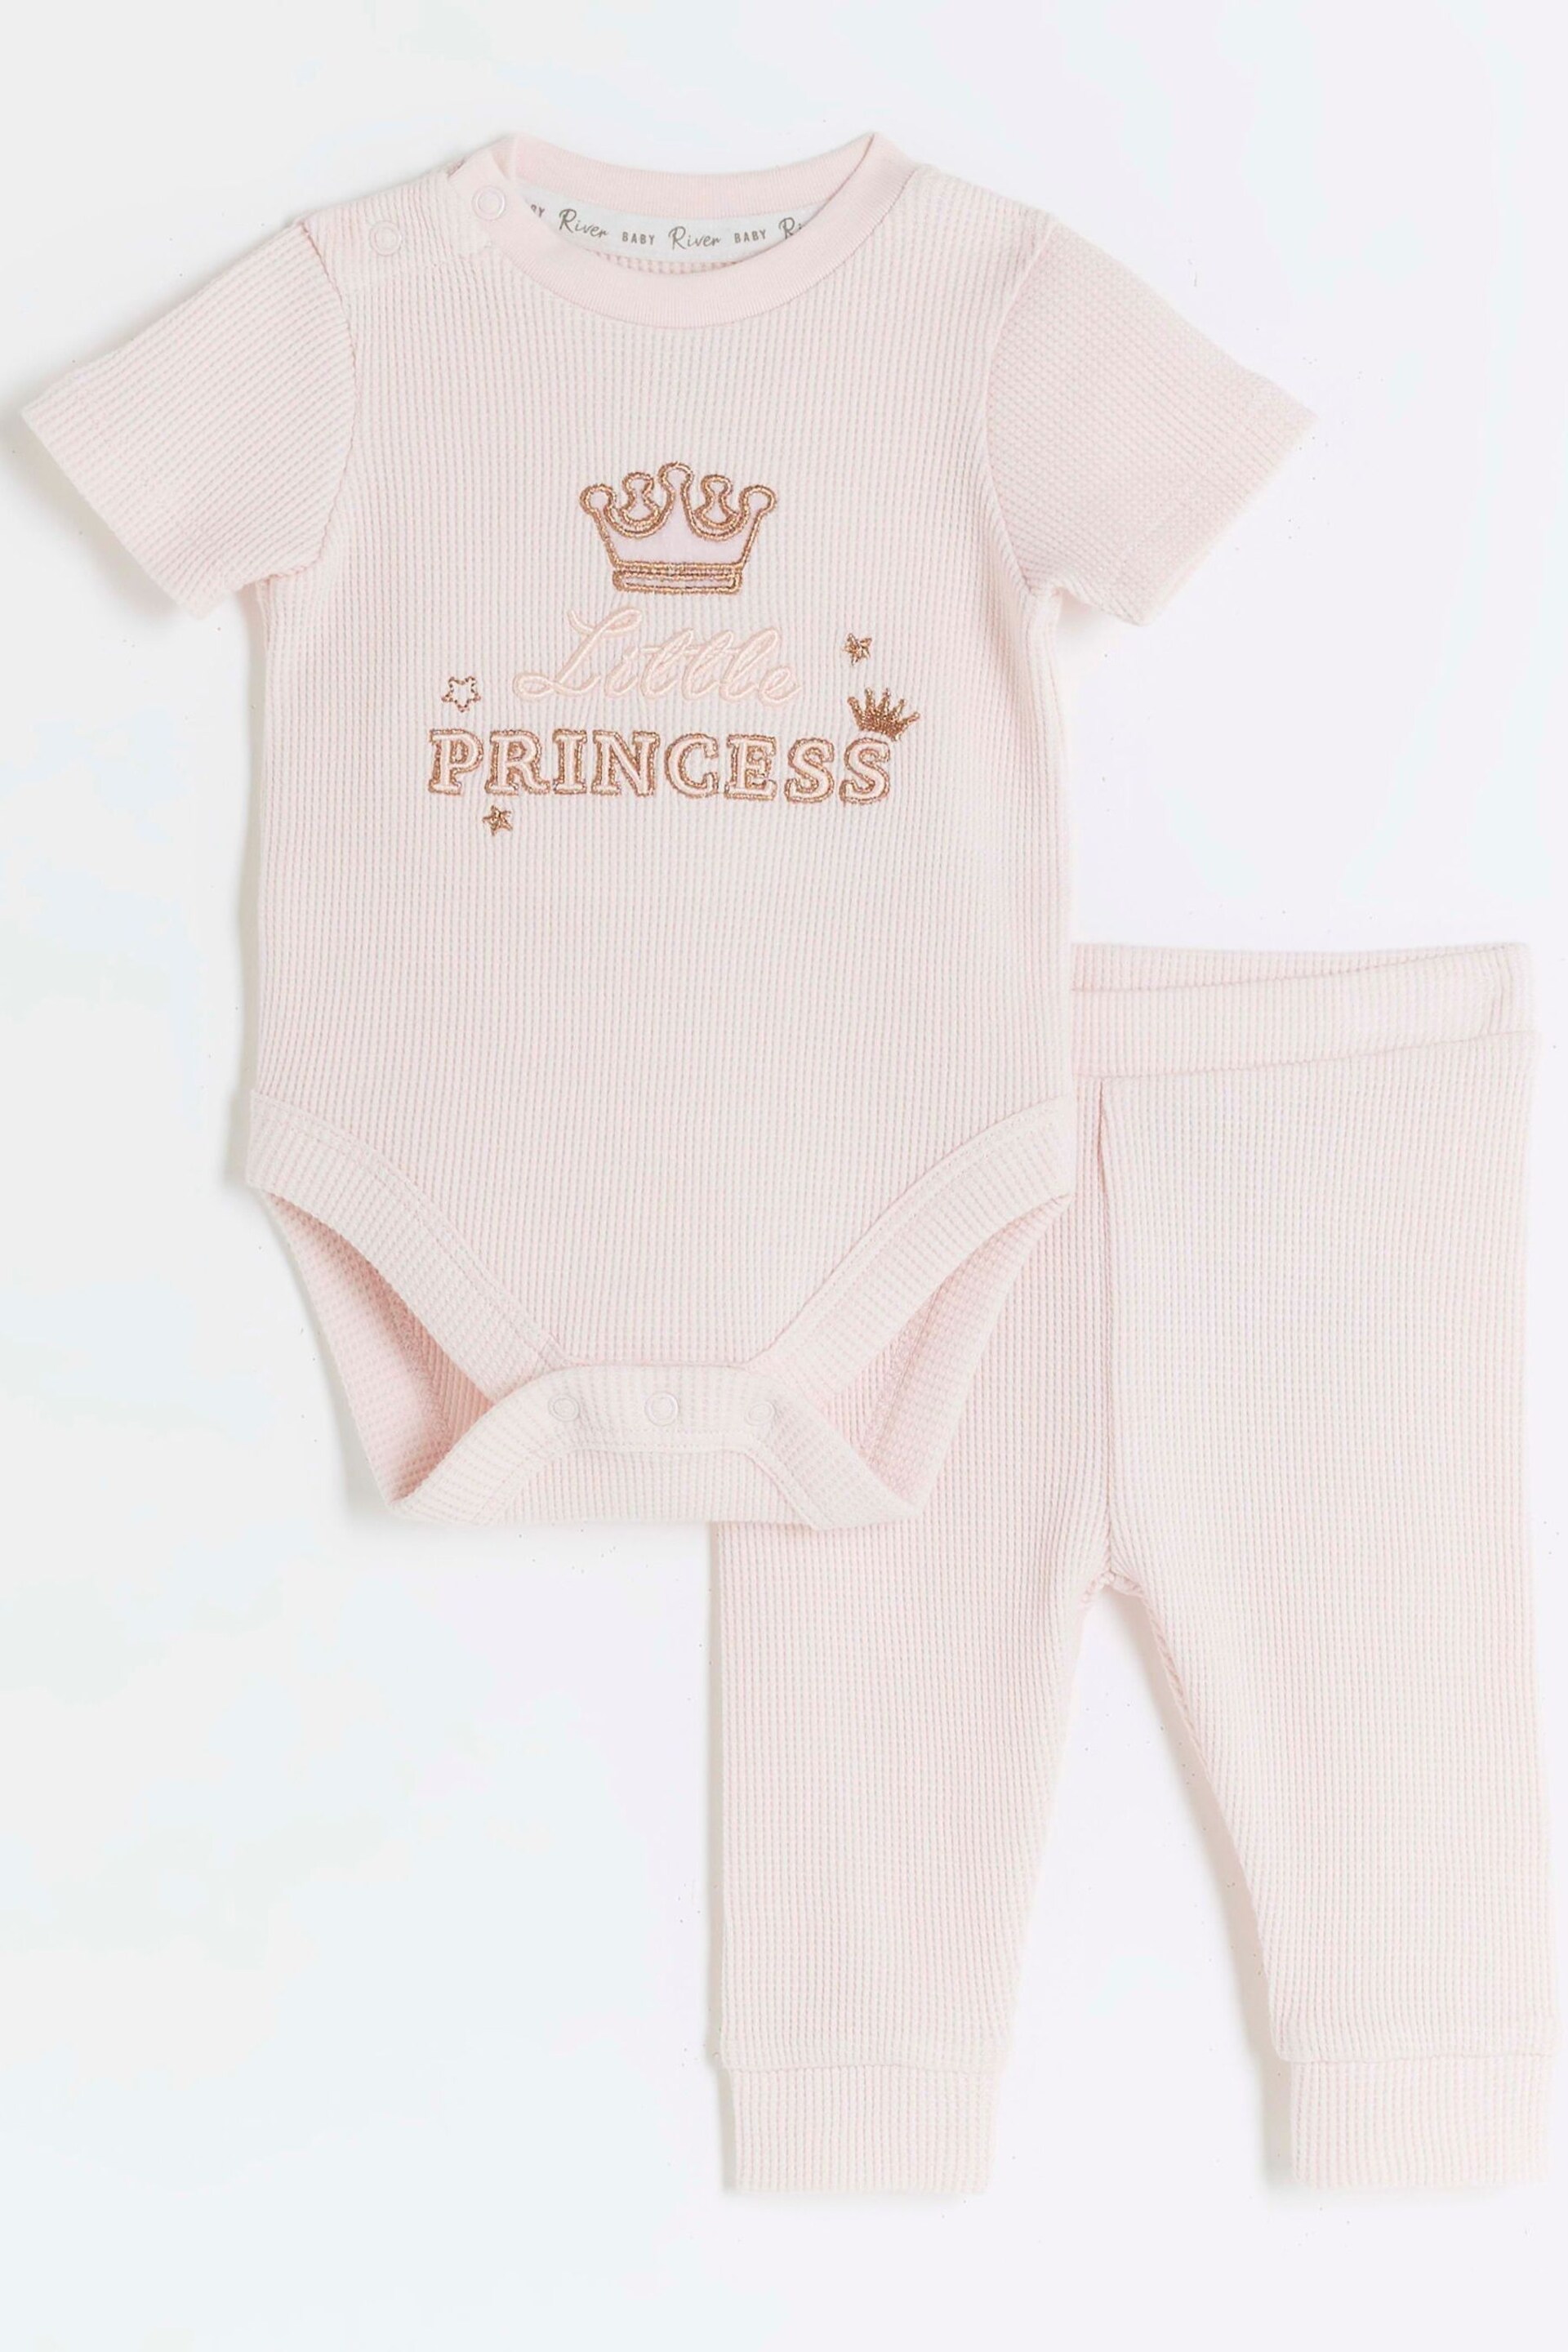 River Island Pink Baby Girls Romper & Joggers Set - Image 1 of 3